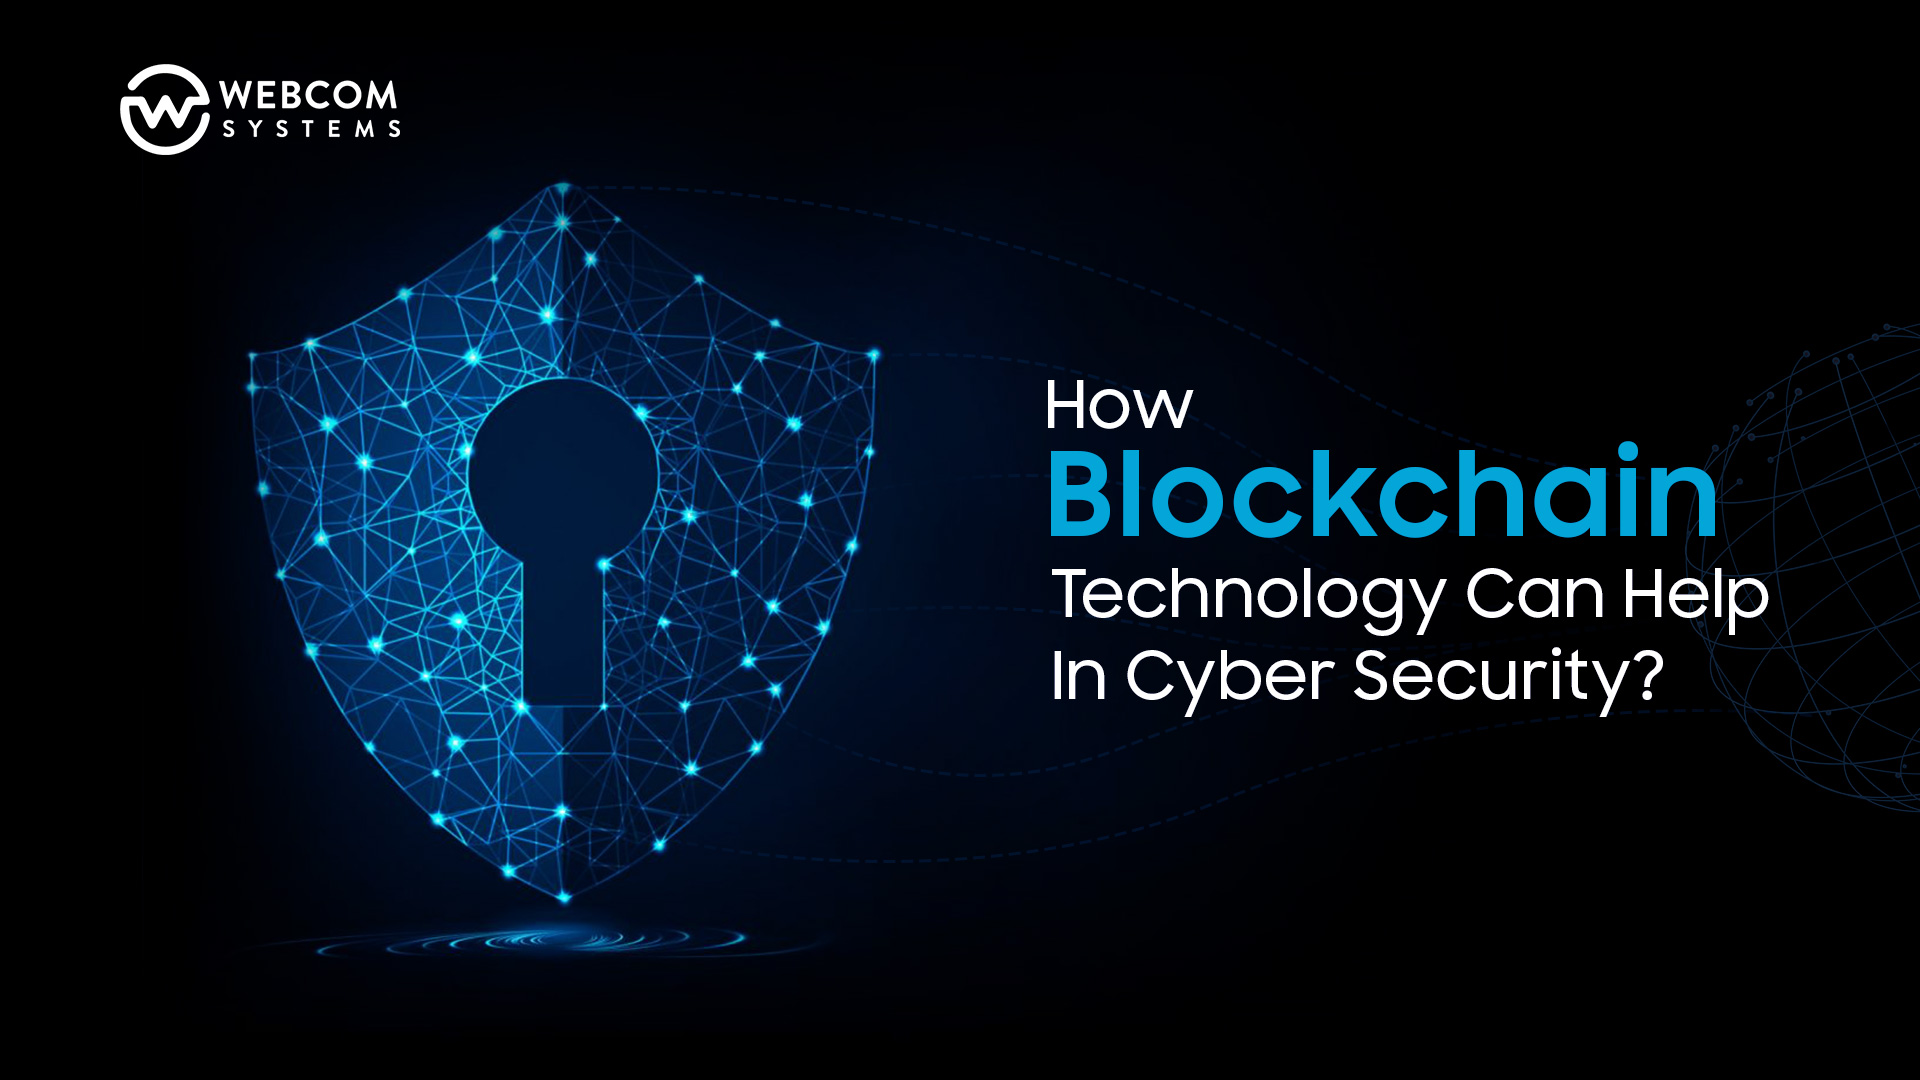 How Blockchain Technology Can Help in Cyber Security?